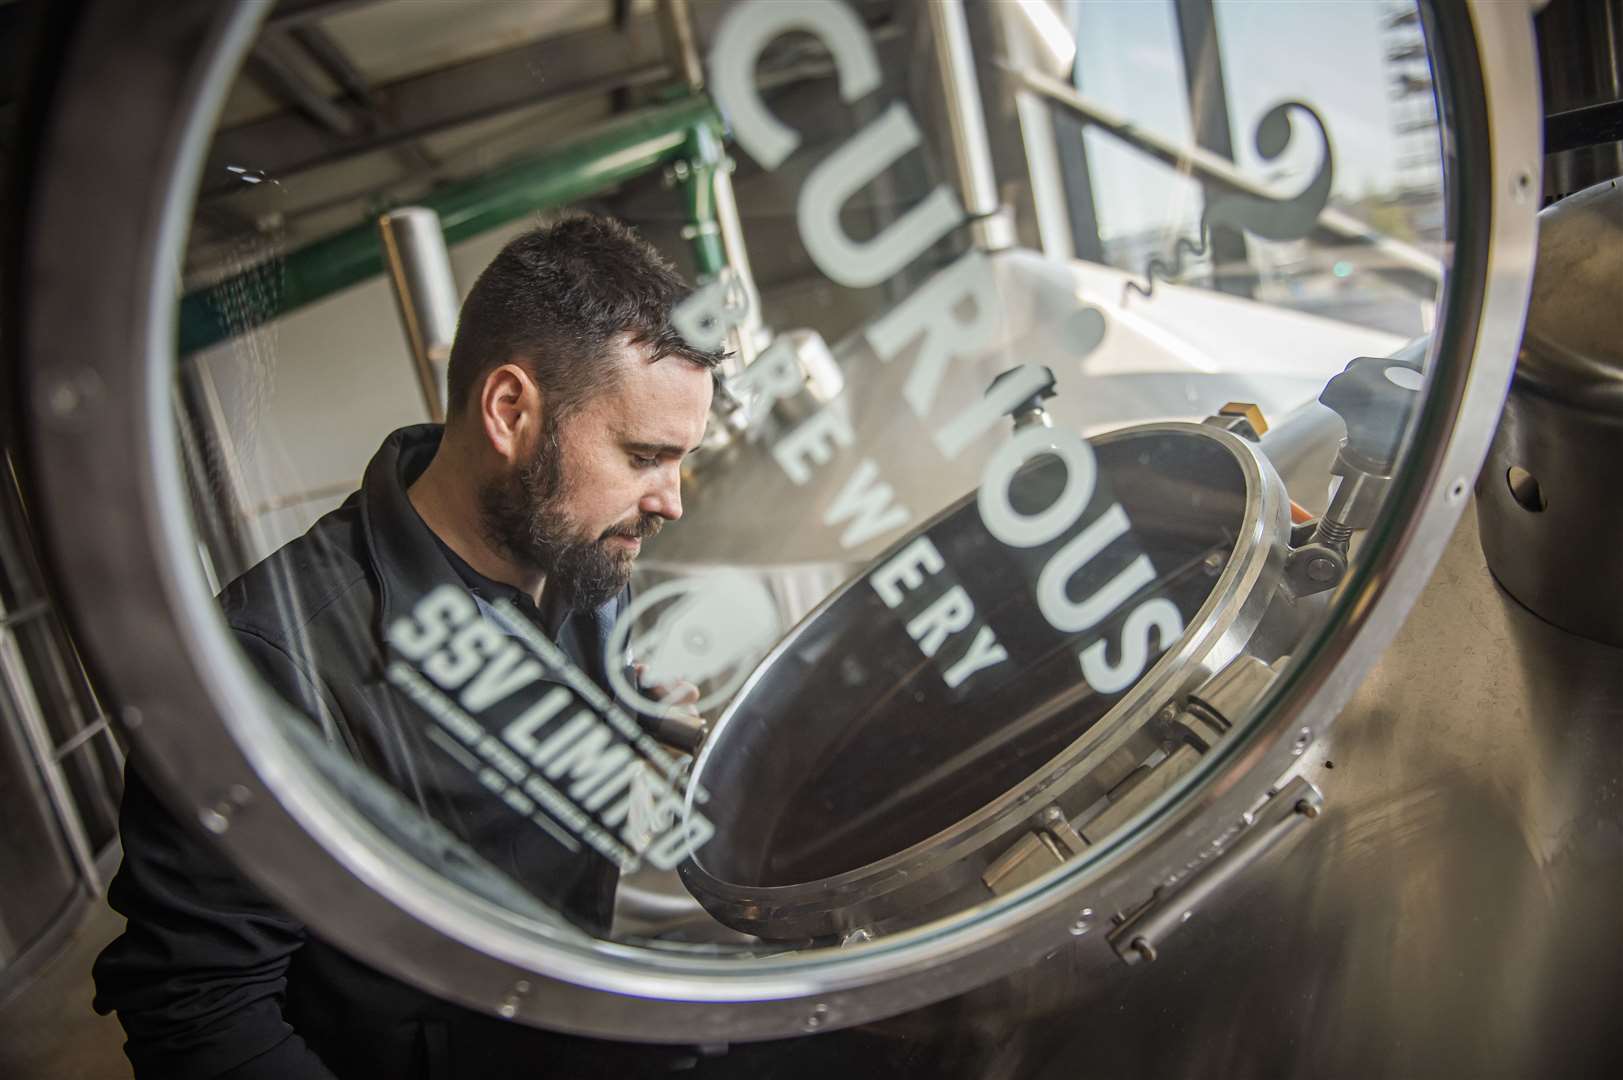 Head brewer Matt Anderson is unable to lead tours for the time being, but is looking forward to a full reopening